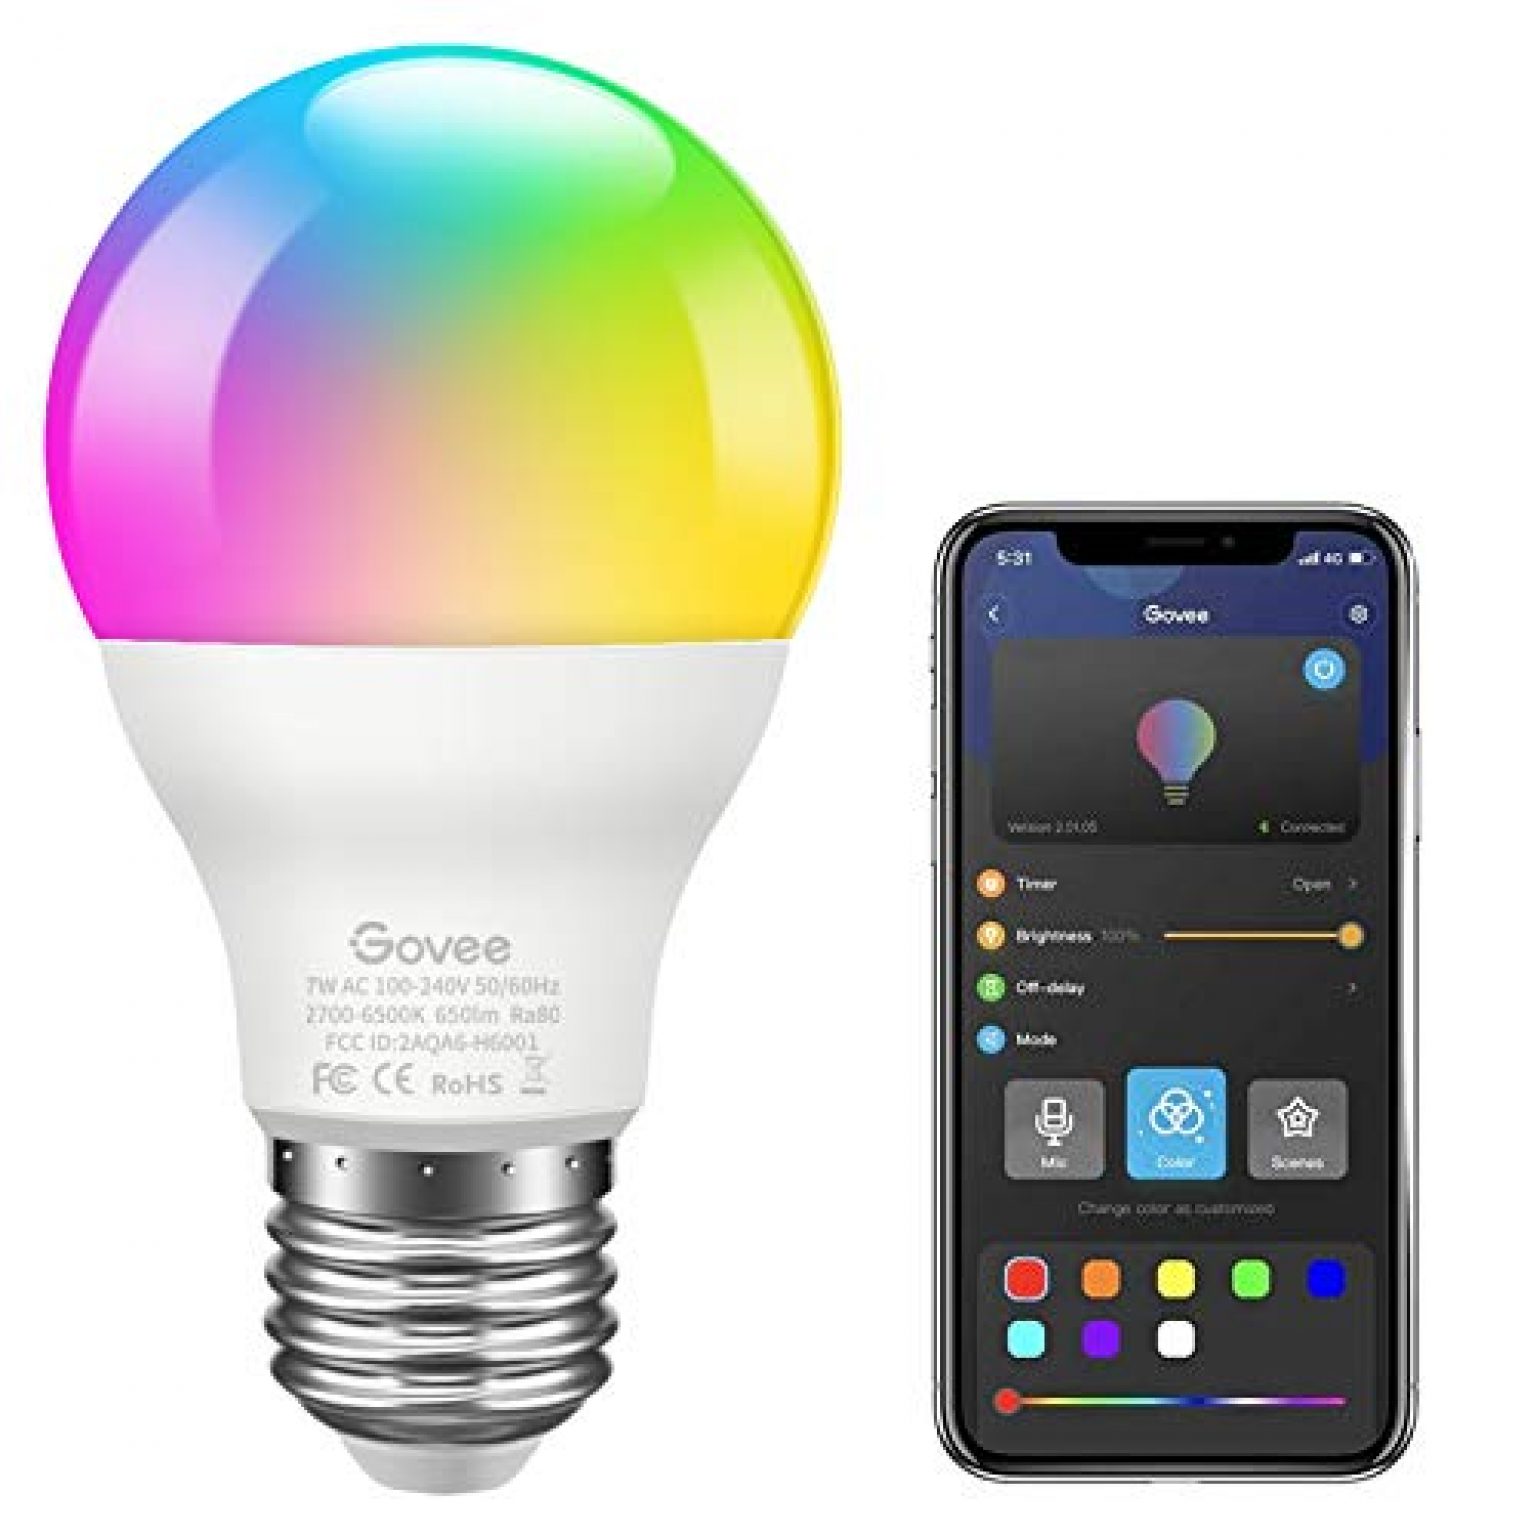 download the new version for ios LightBulb 2.4.6